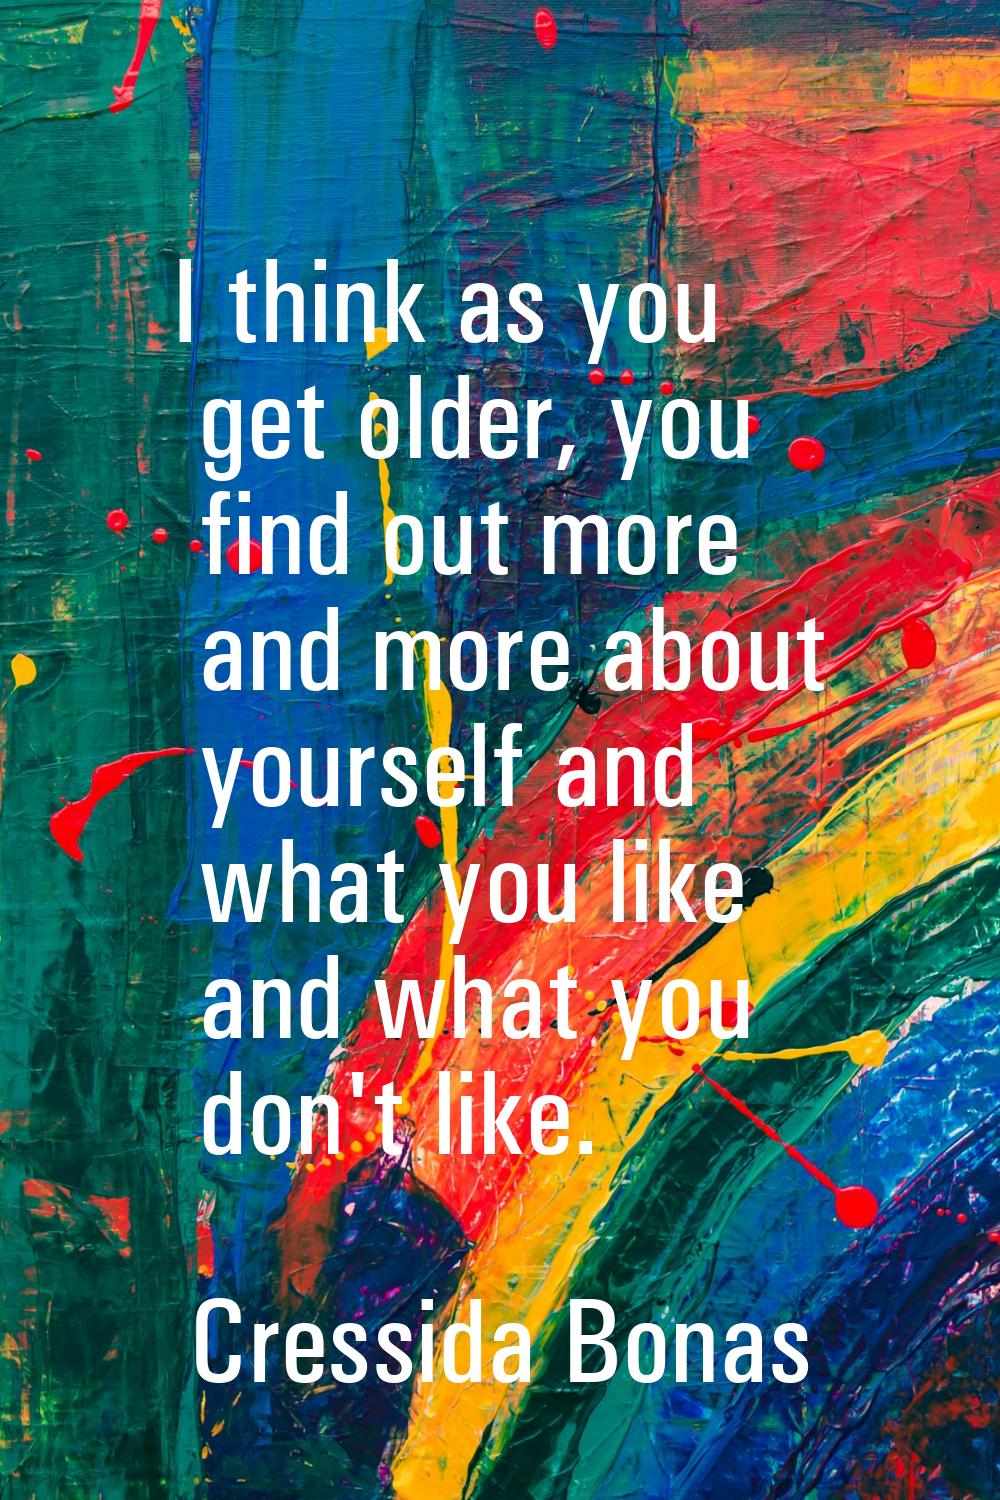 I think as you get older, you find out more and more about yourself and what you like and what you 